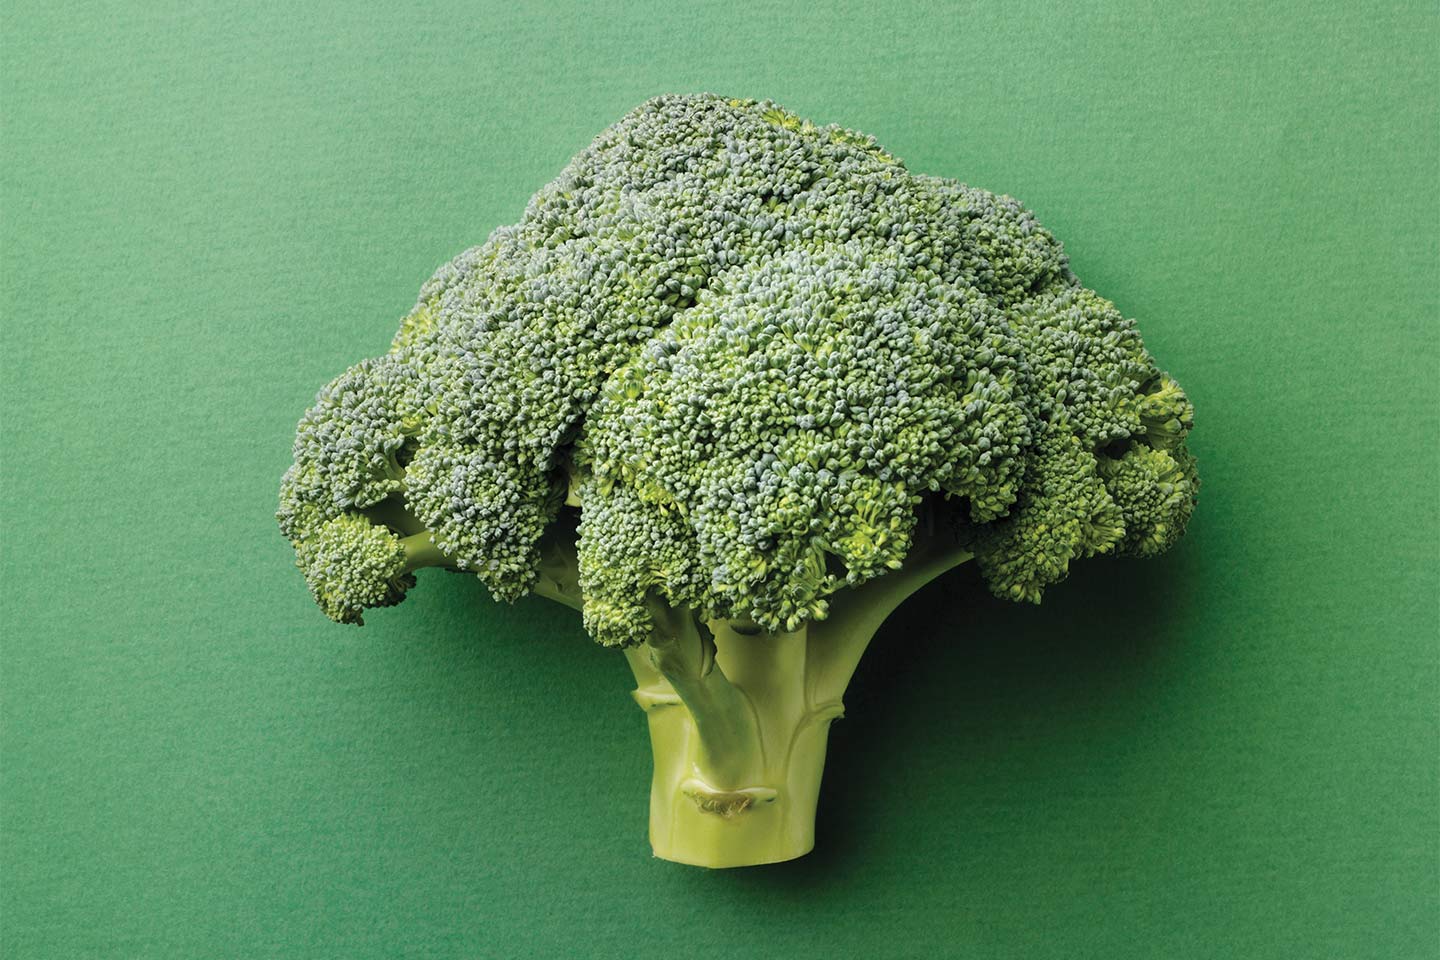 giant head of broccoli on a green background